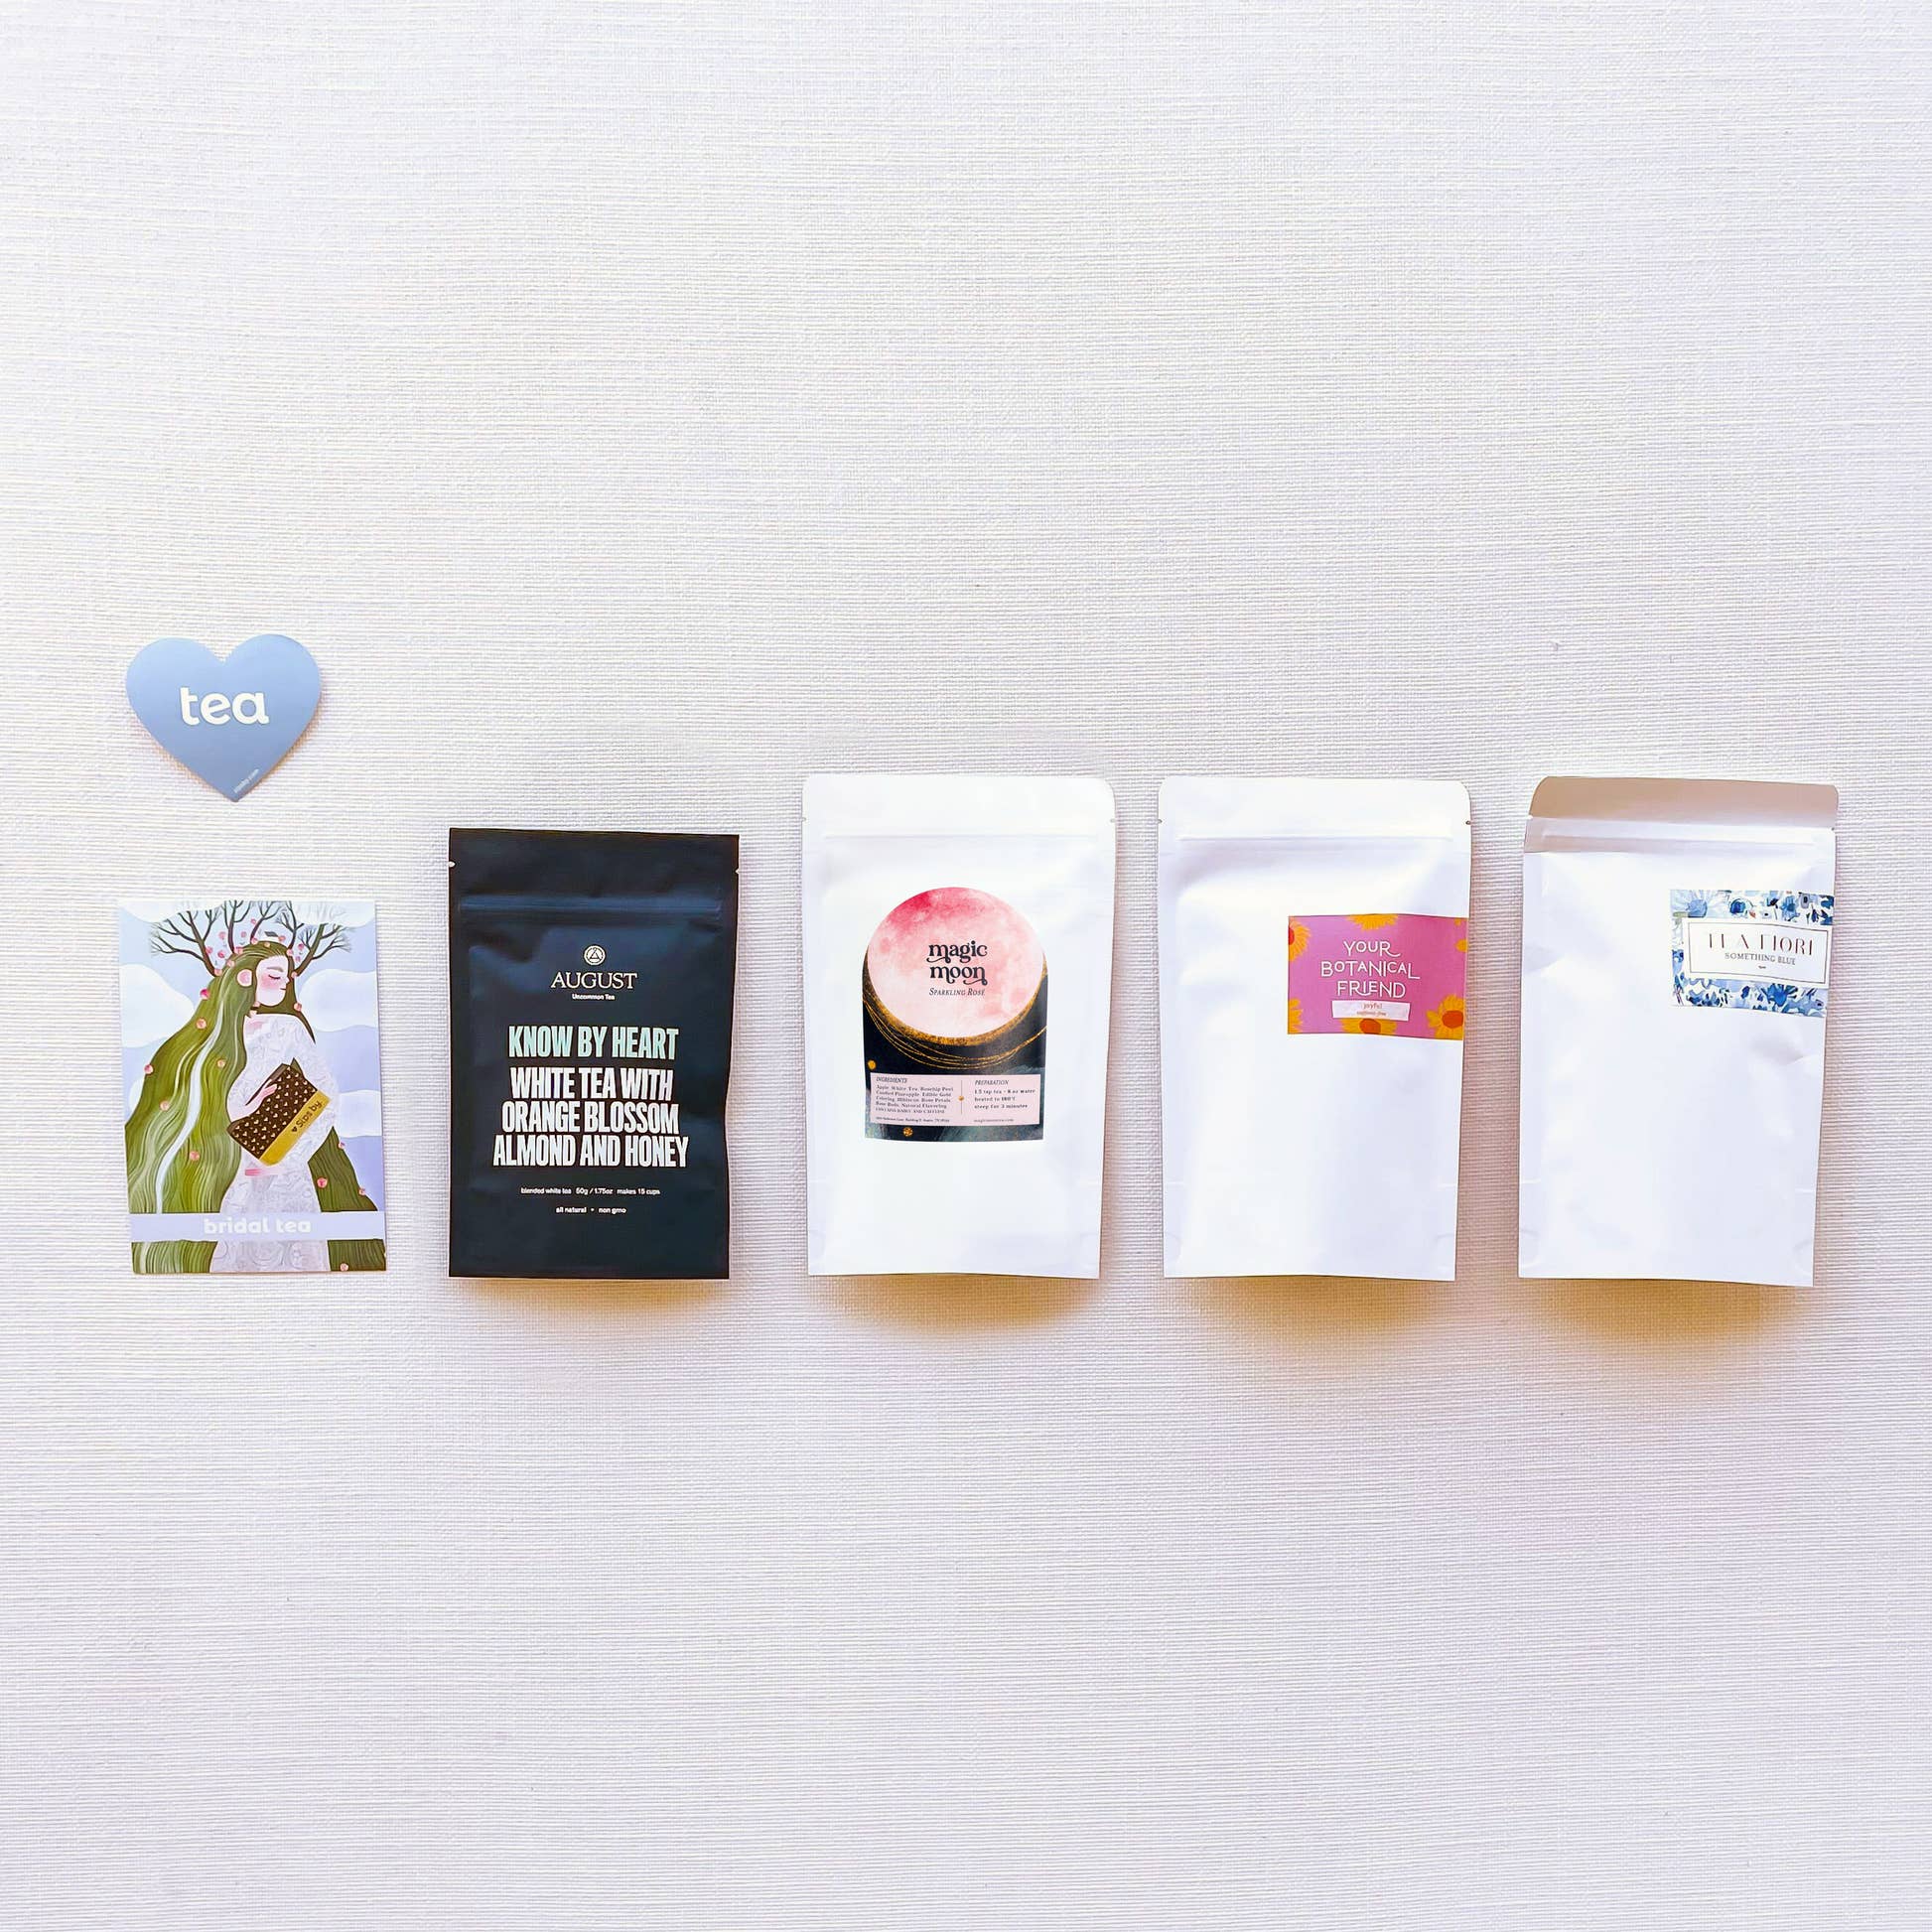 Sips by Bridal Tea Collection tea packages with postcard and blue tea heart sticker